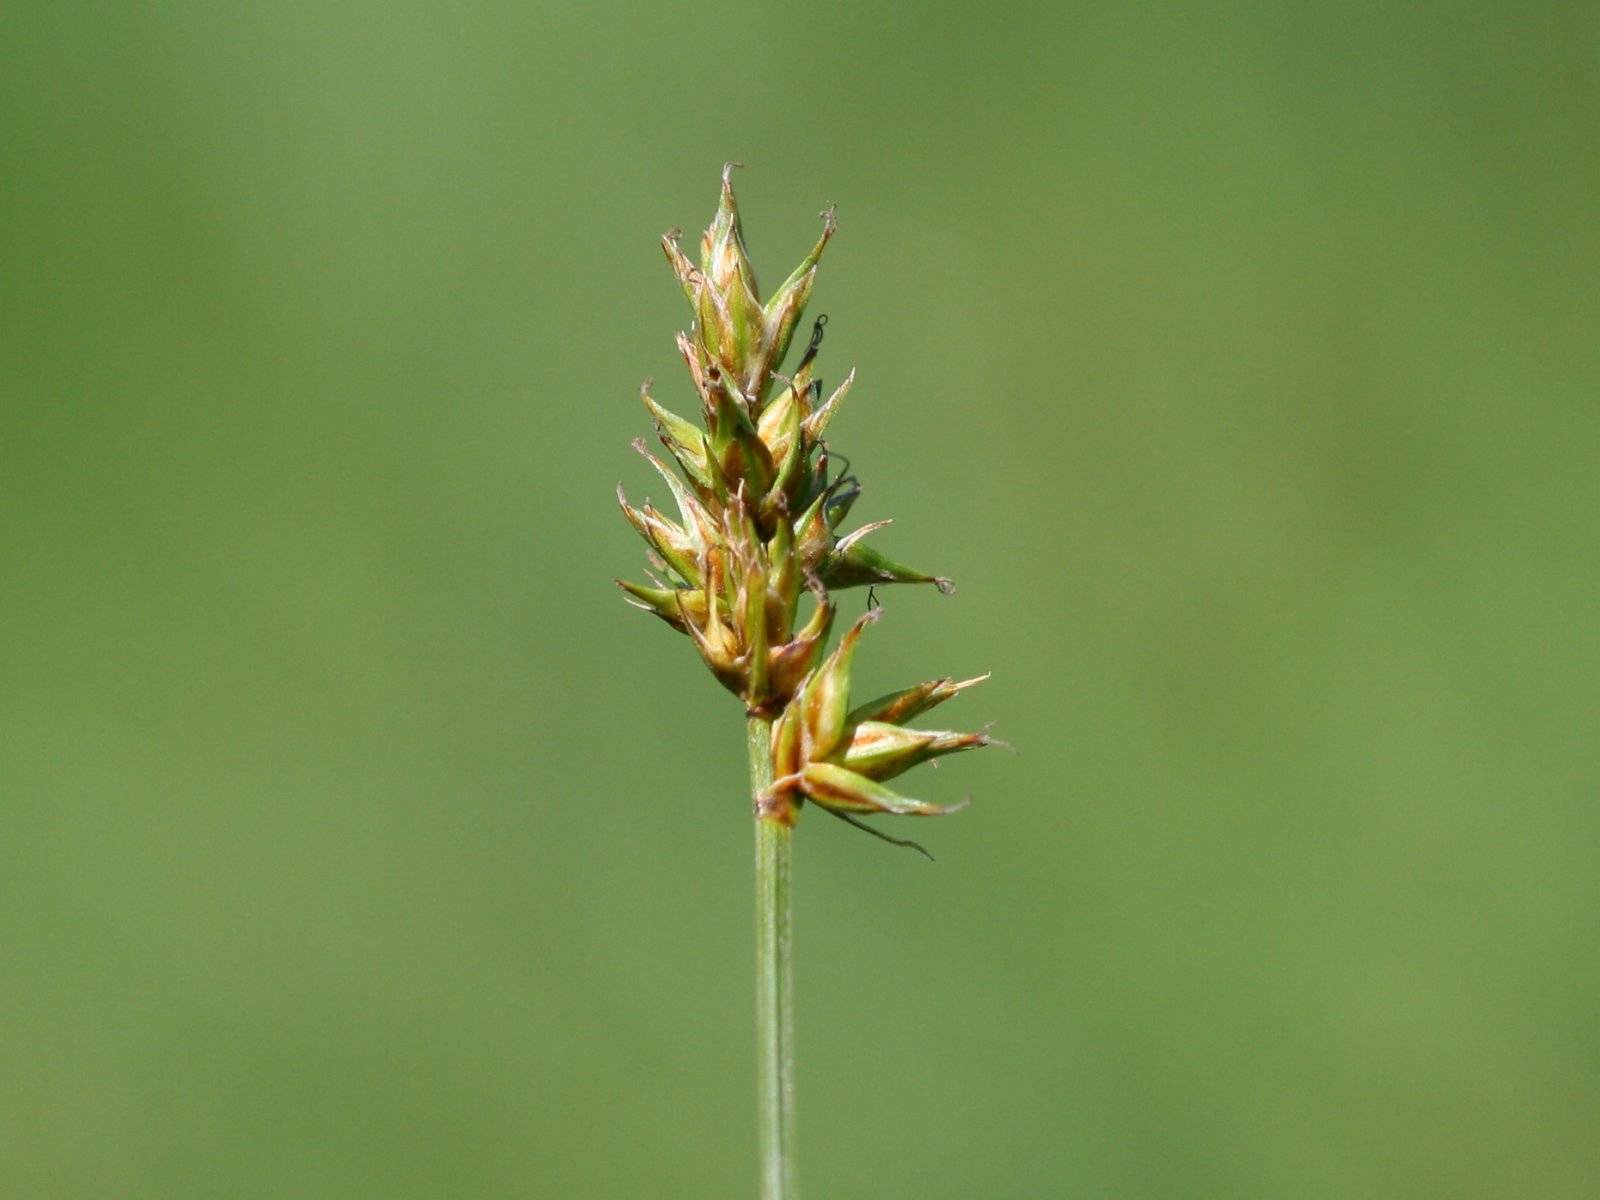 lime-brown spikelet with green foliage